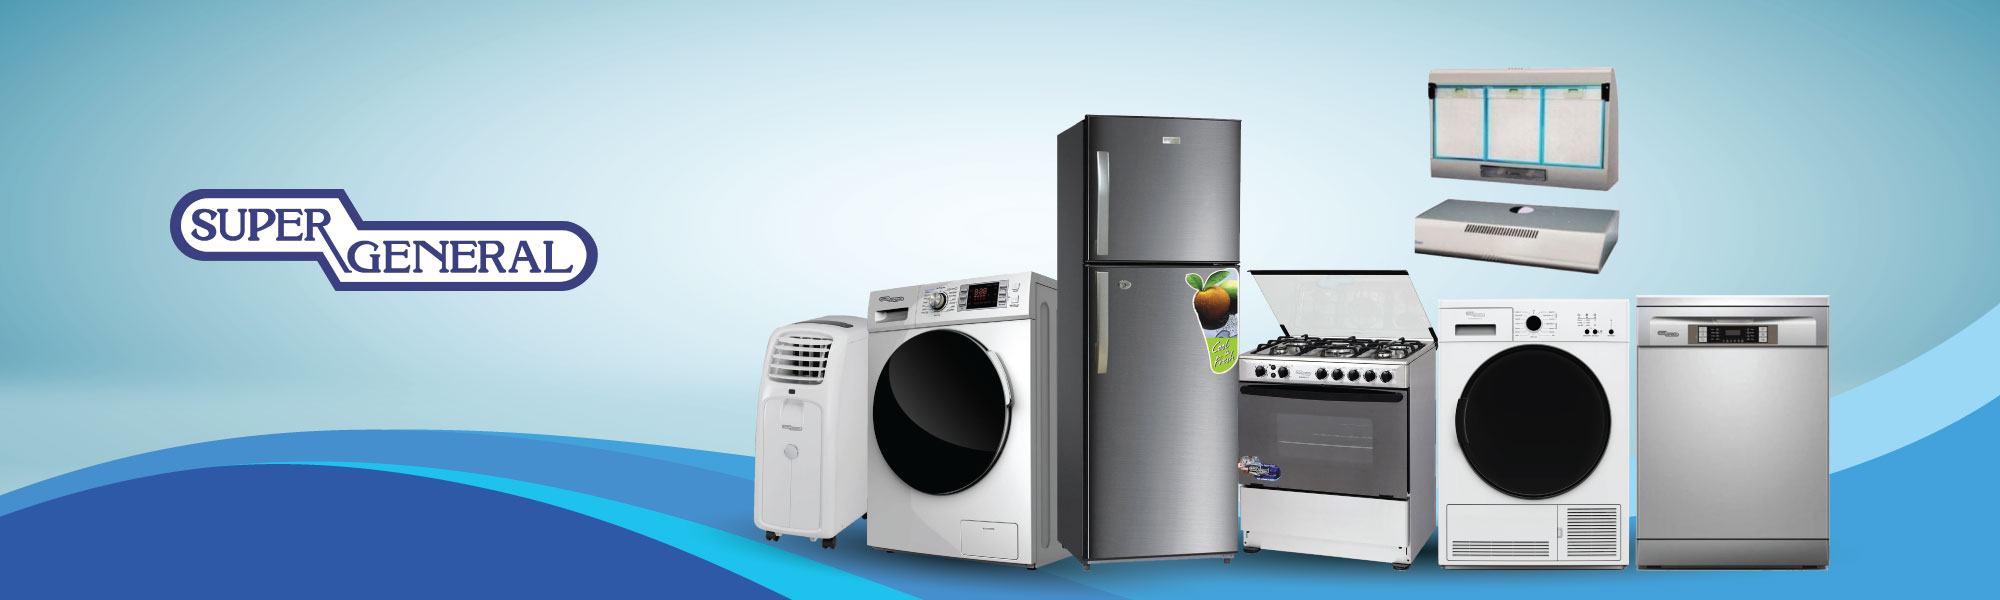 Super General Service Center and Home Appliances Support Center